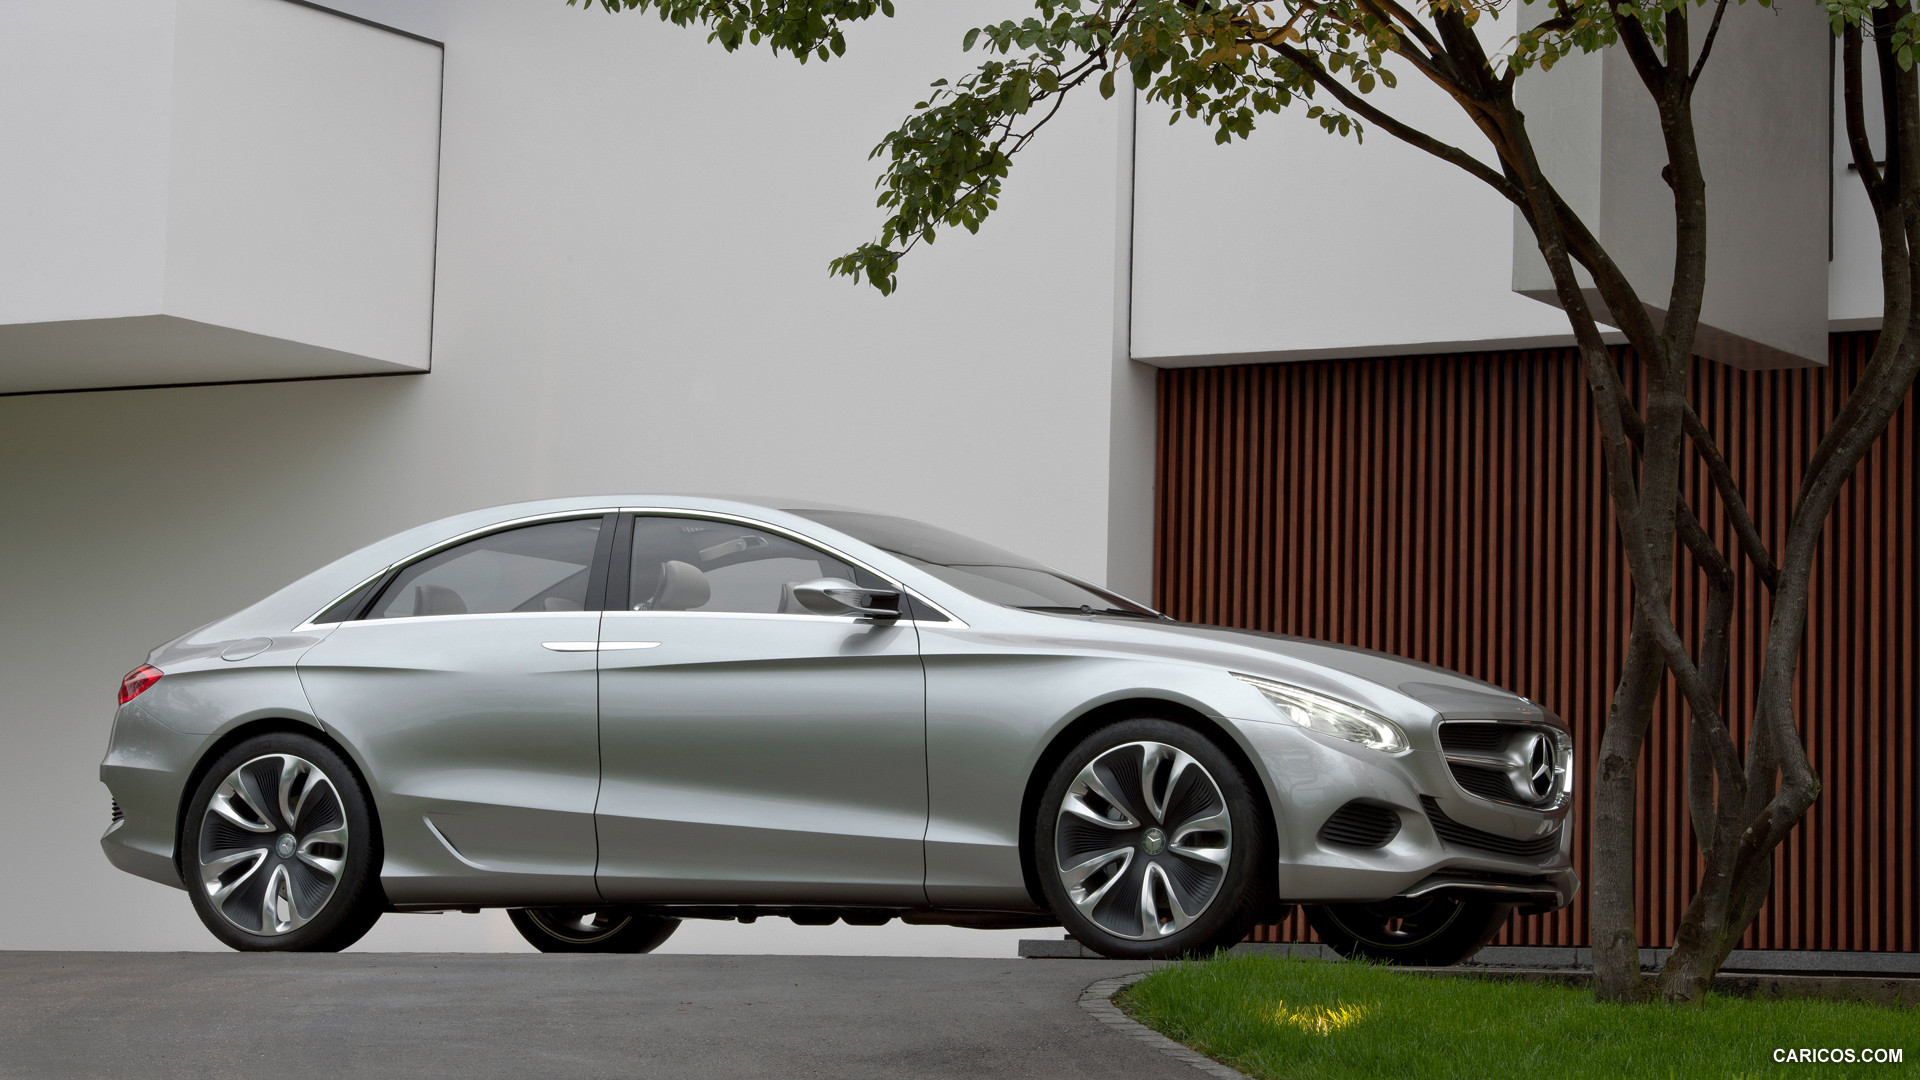 Mercedes-Benz F800 Style Concept (2010)  - Side, #27 of 120